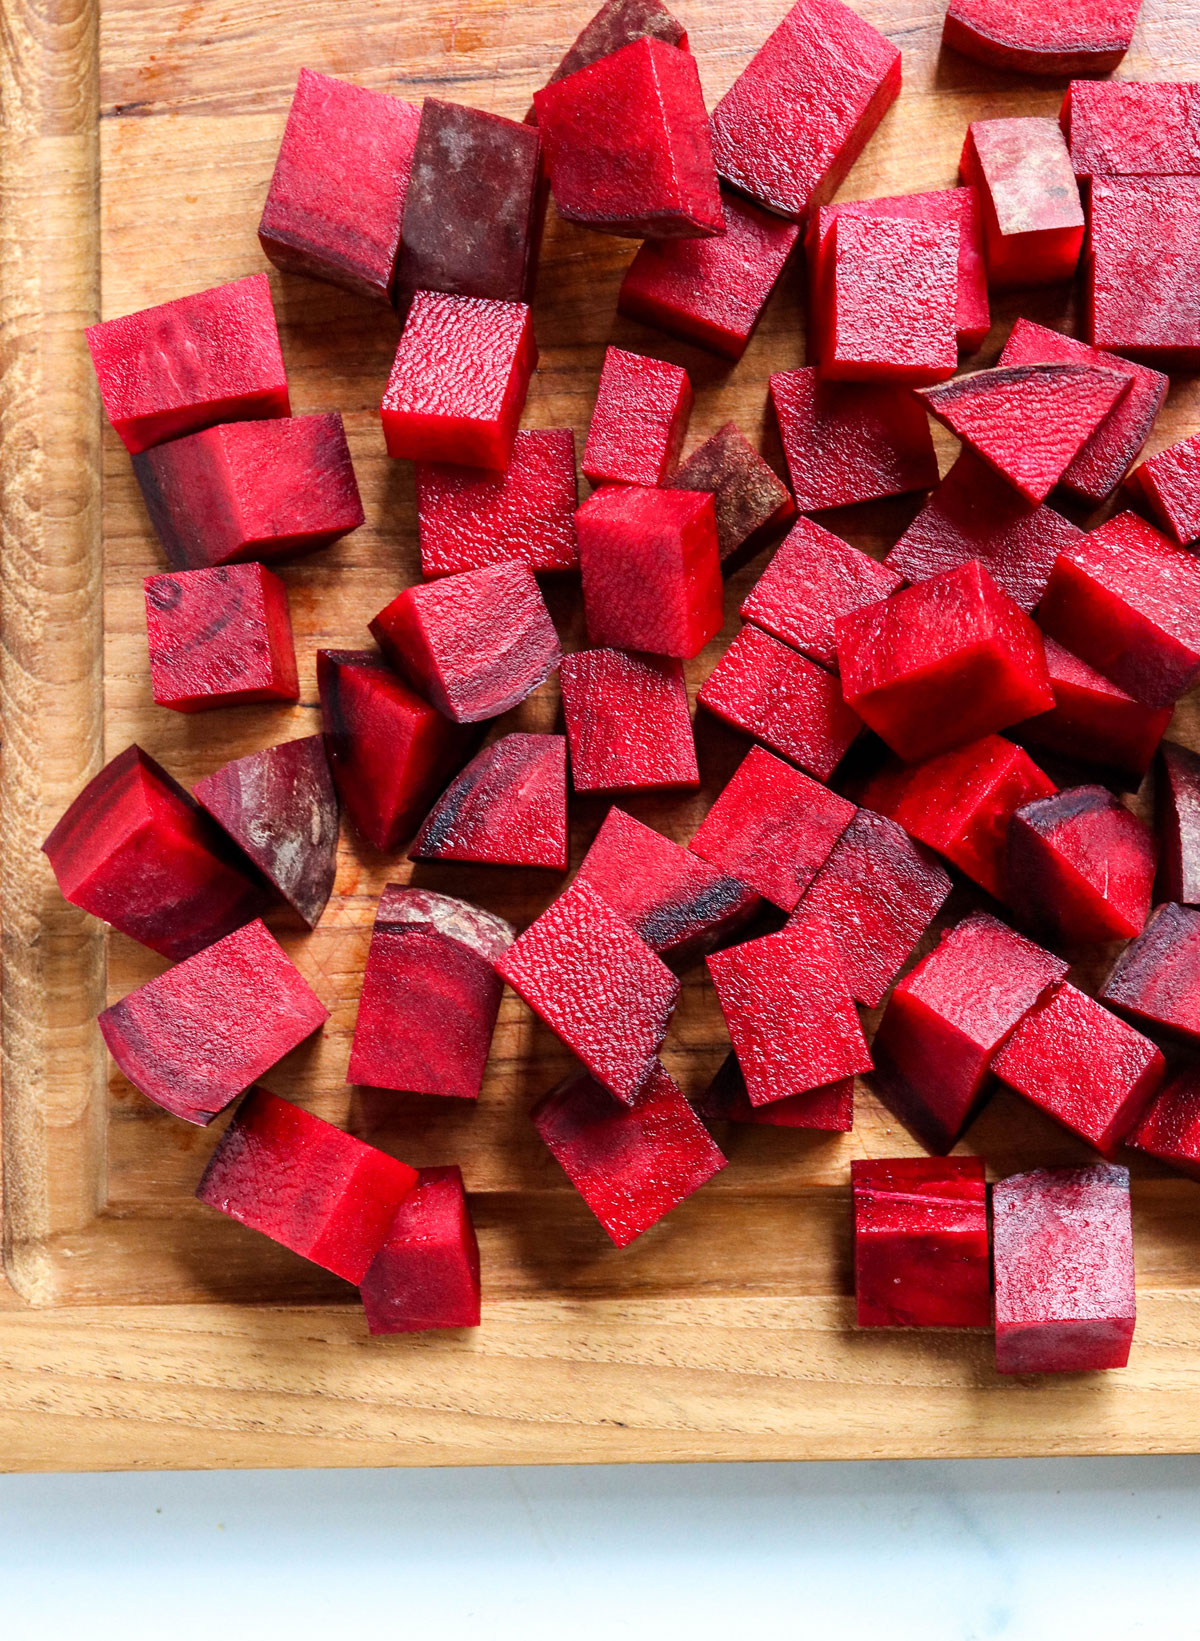 beets sliced into cubes on cutting board